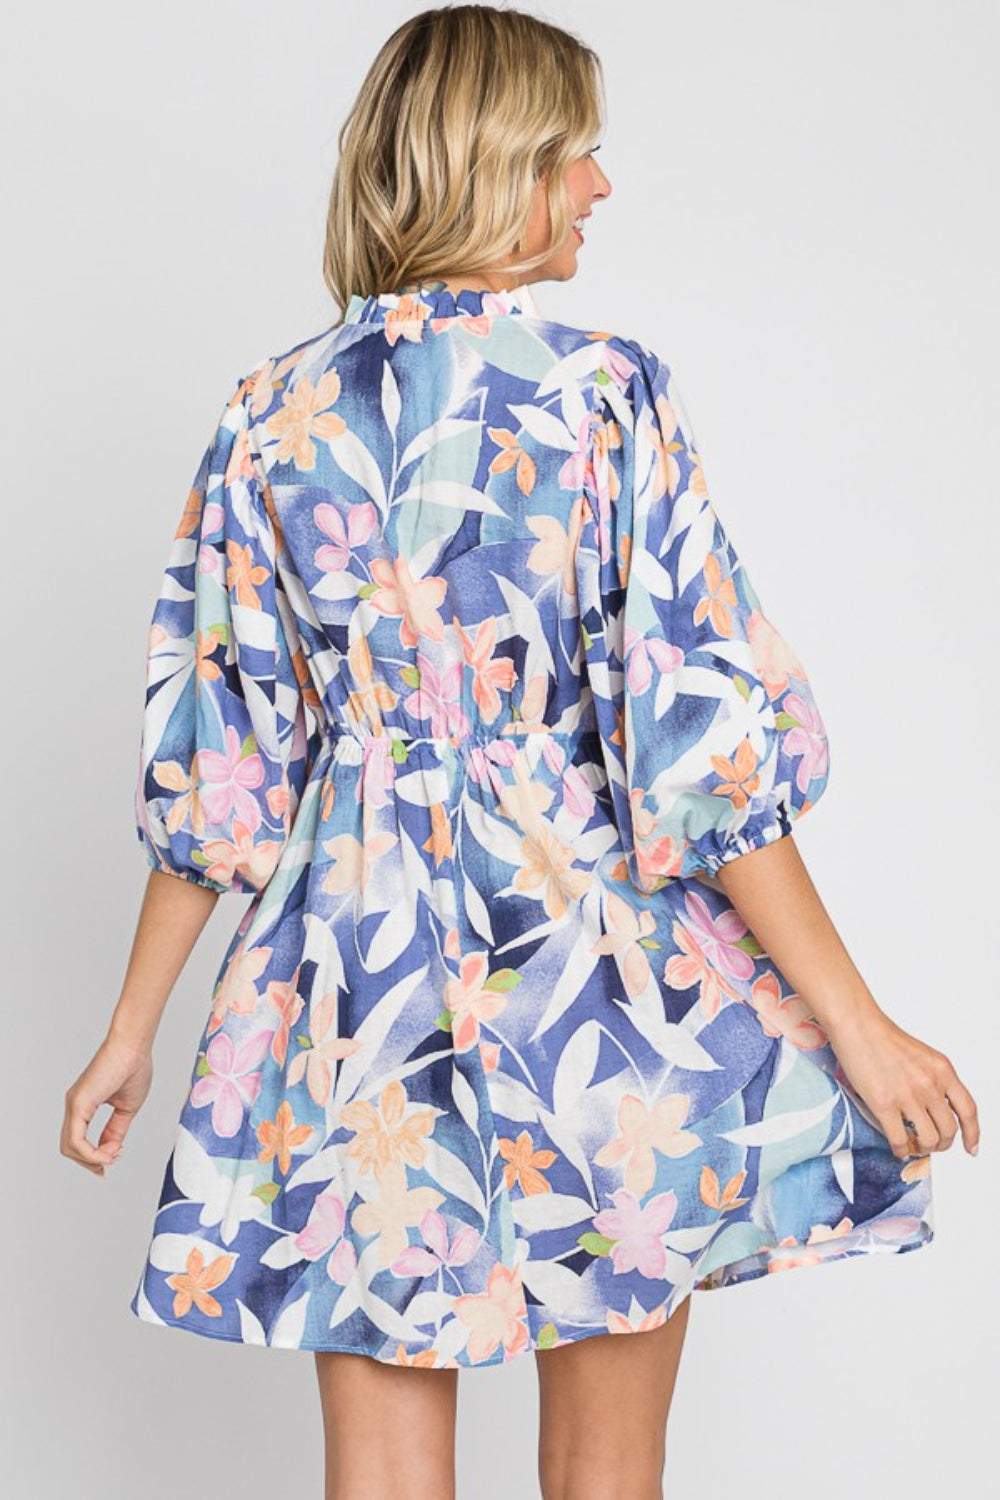 Chic Floral Print Mini Dress for Graduation and Commencement Celebrations